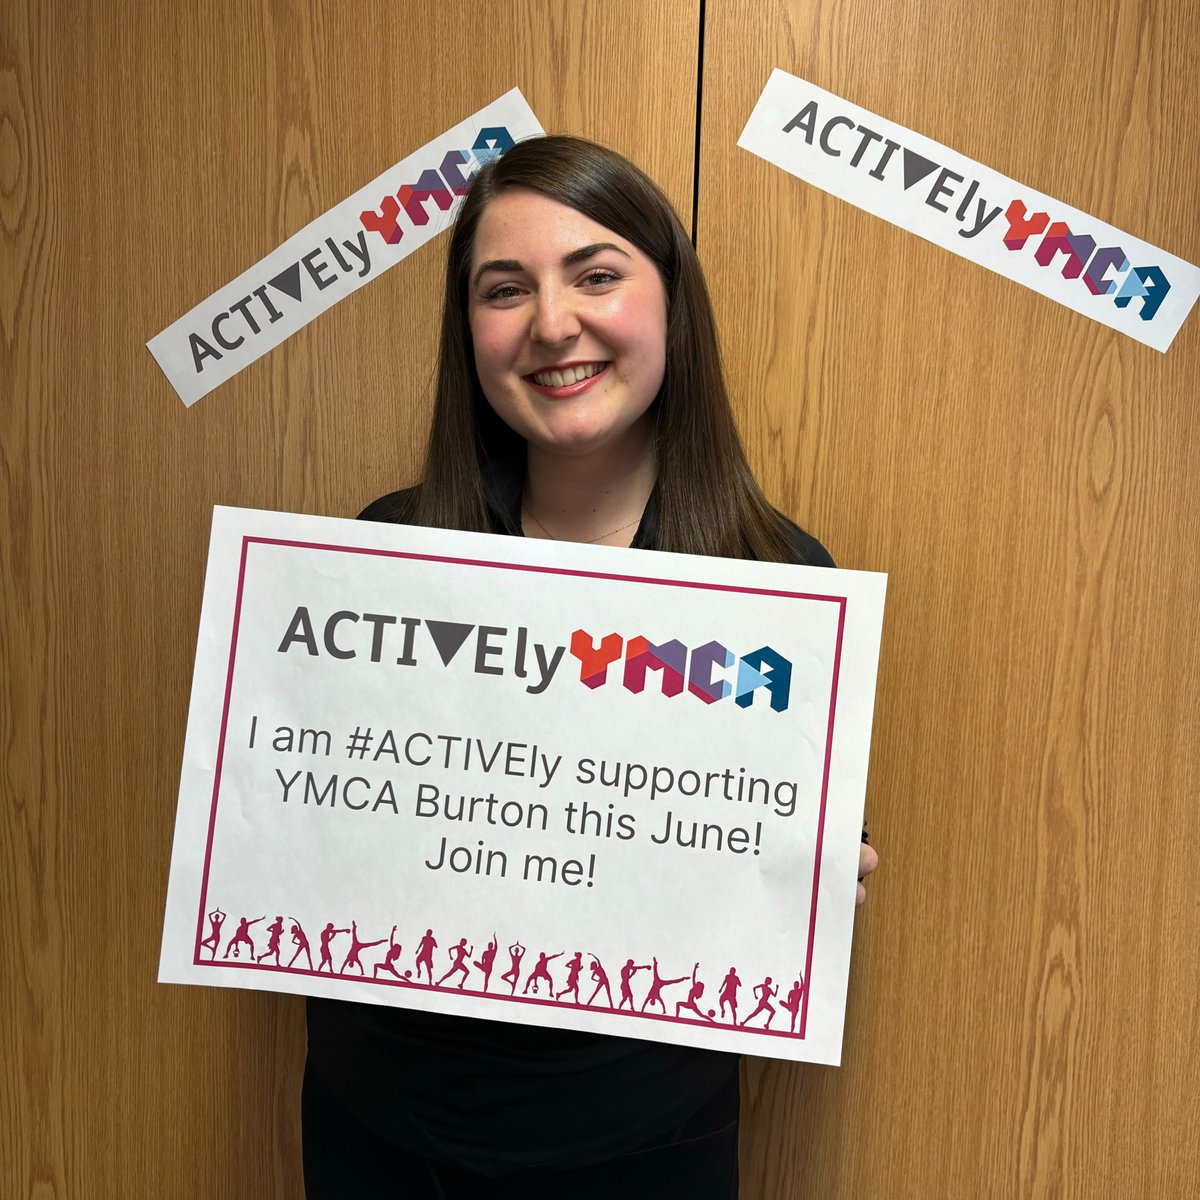 Are you ready to take on your next challenge? ACTIVEly support YMCA Burton next month! Join us on your own, with family, friends or colleagues and complete 50 miles within 30 days to help your local community. Visit: burtonymca.org/activelyymca/ for more details